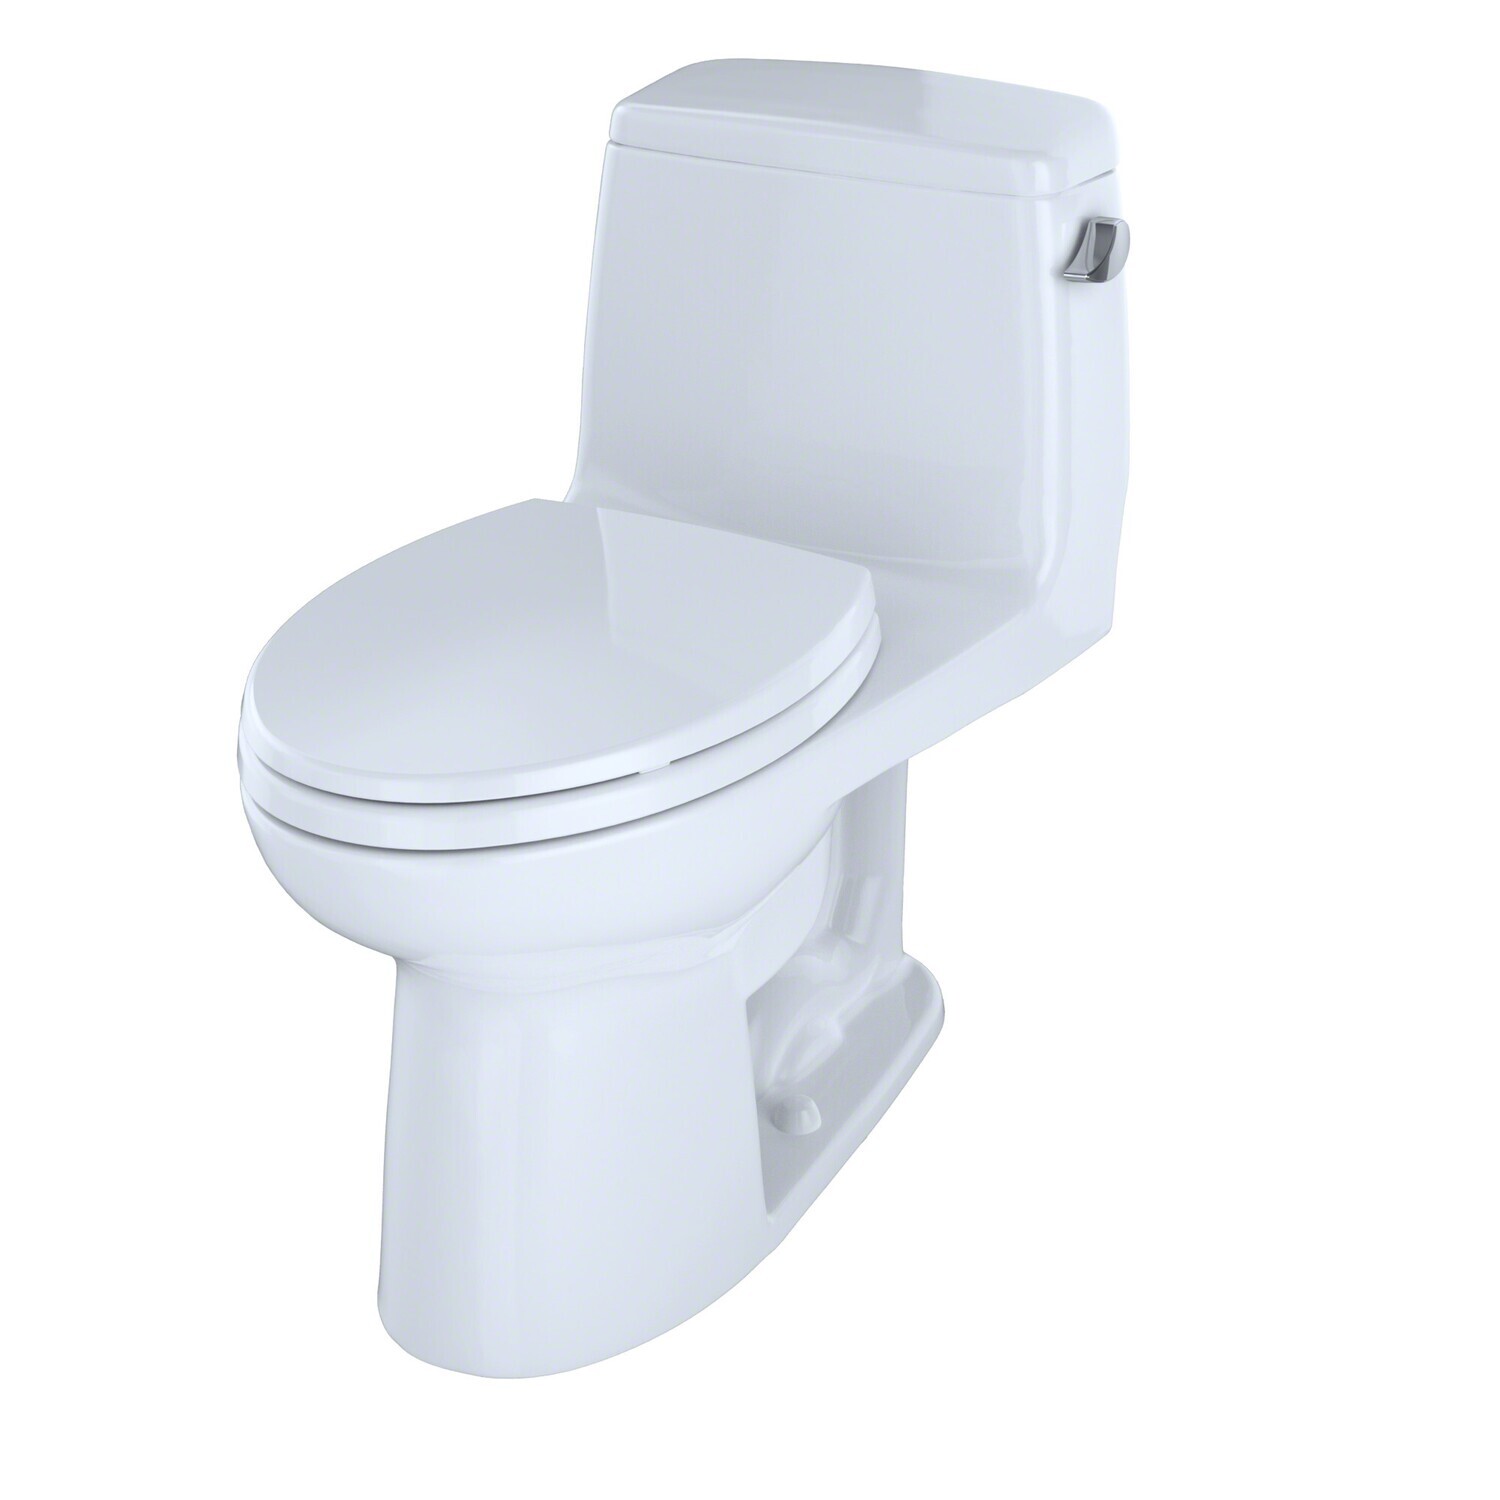 TOTO - UltraMax® One-Piece Toilet, ADA Height, 1.6 GPF, Cotton White MS854114SLR#01